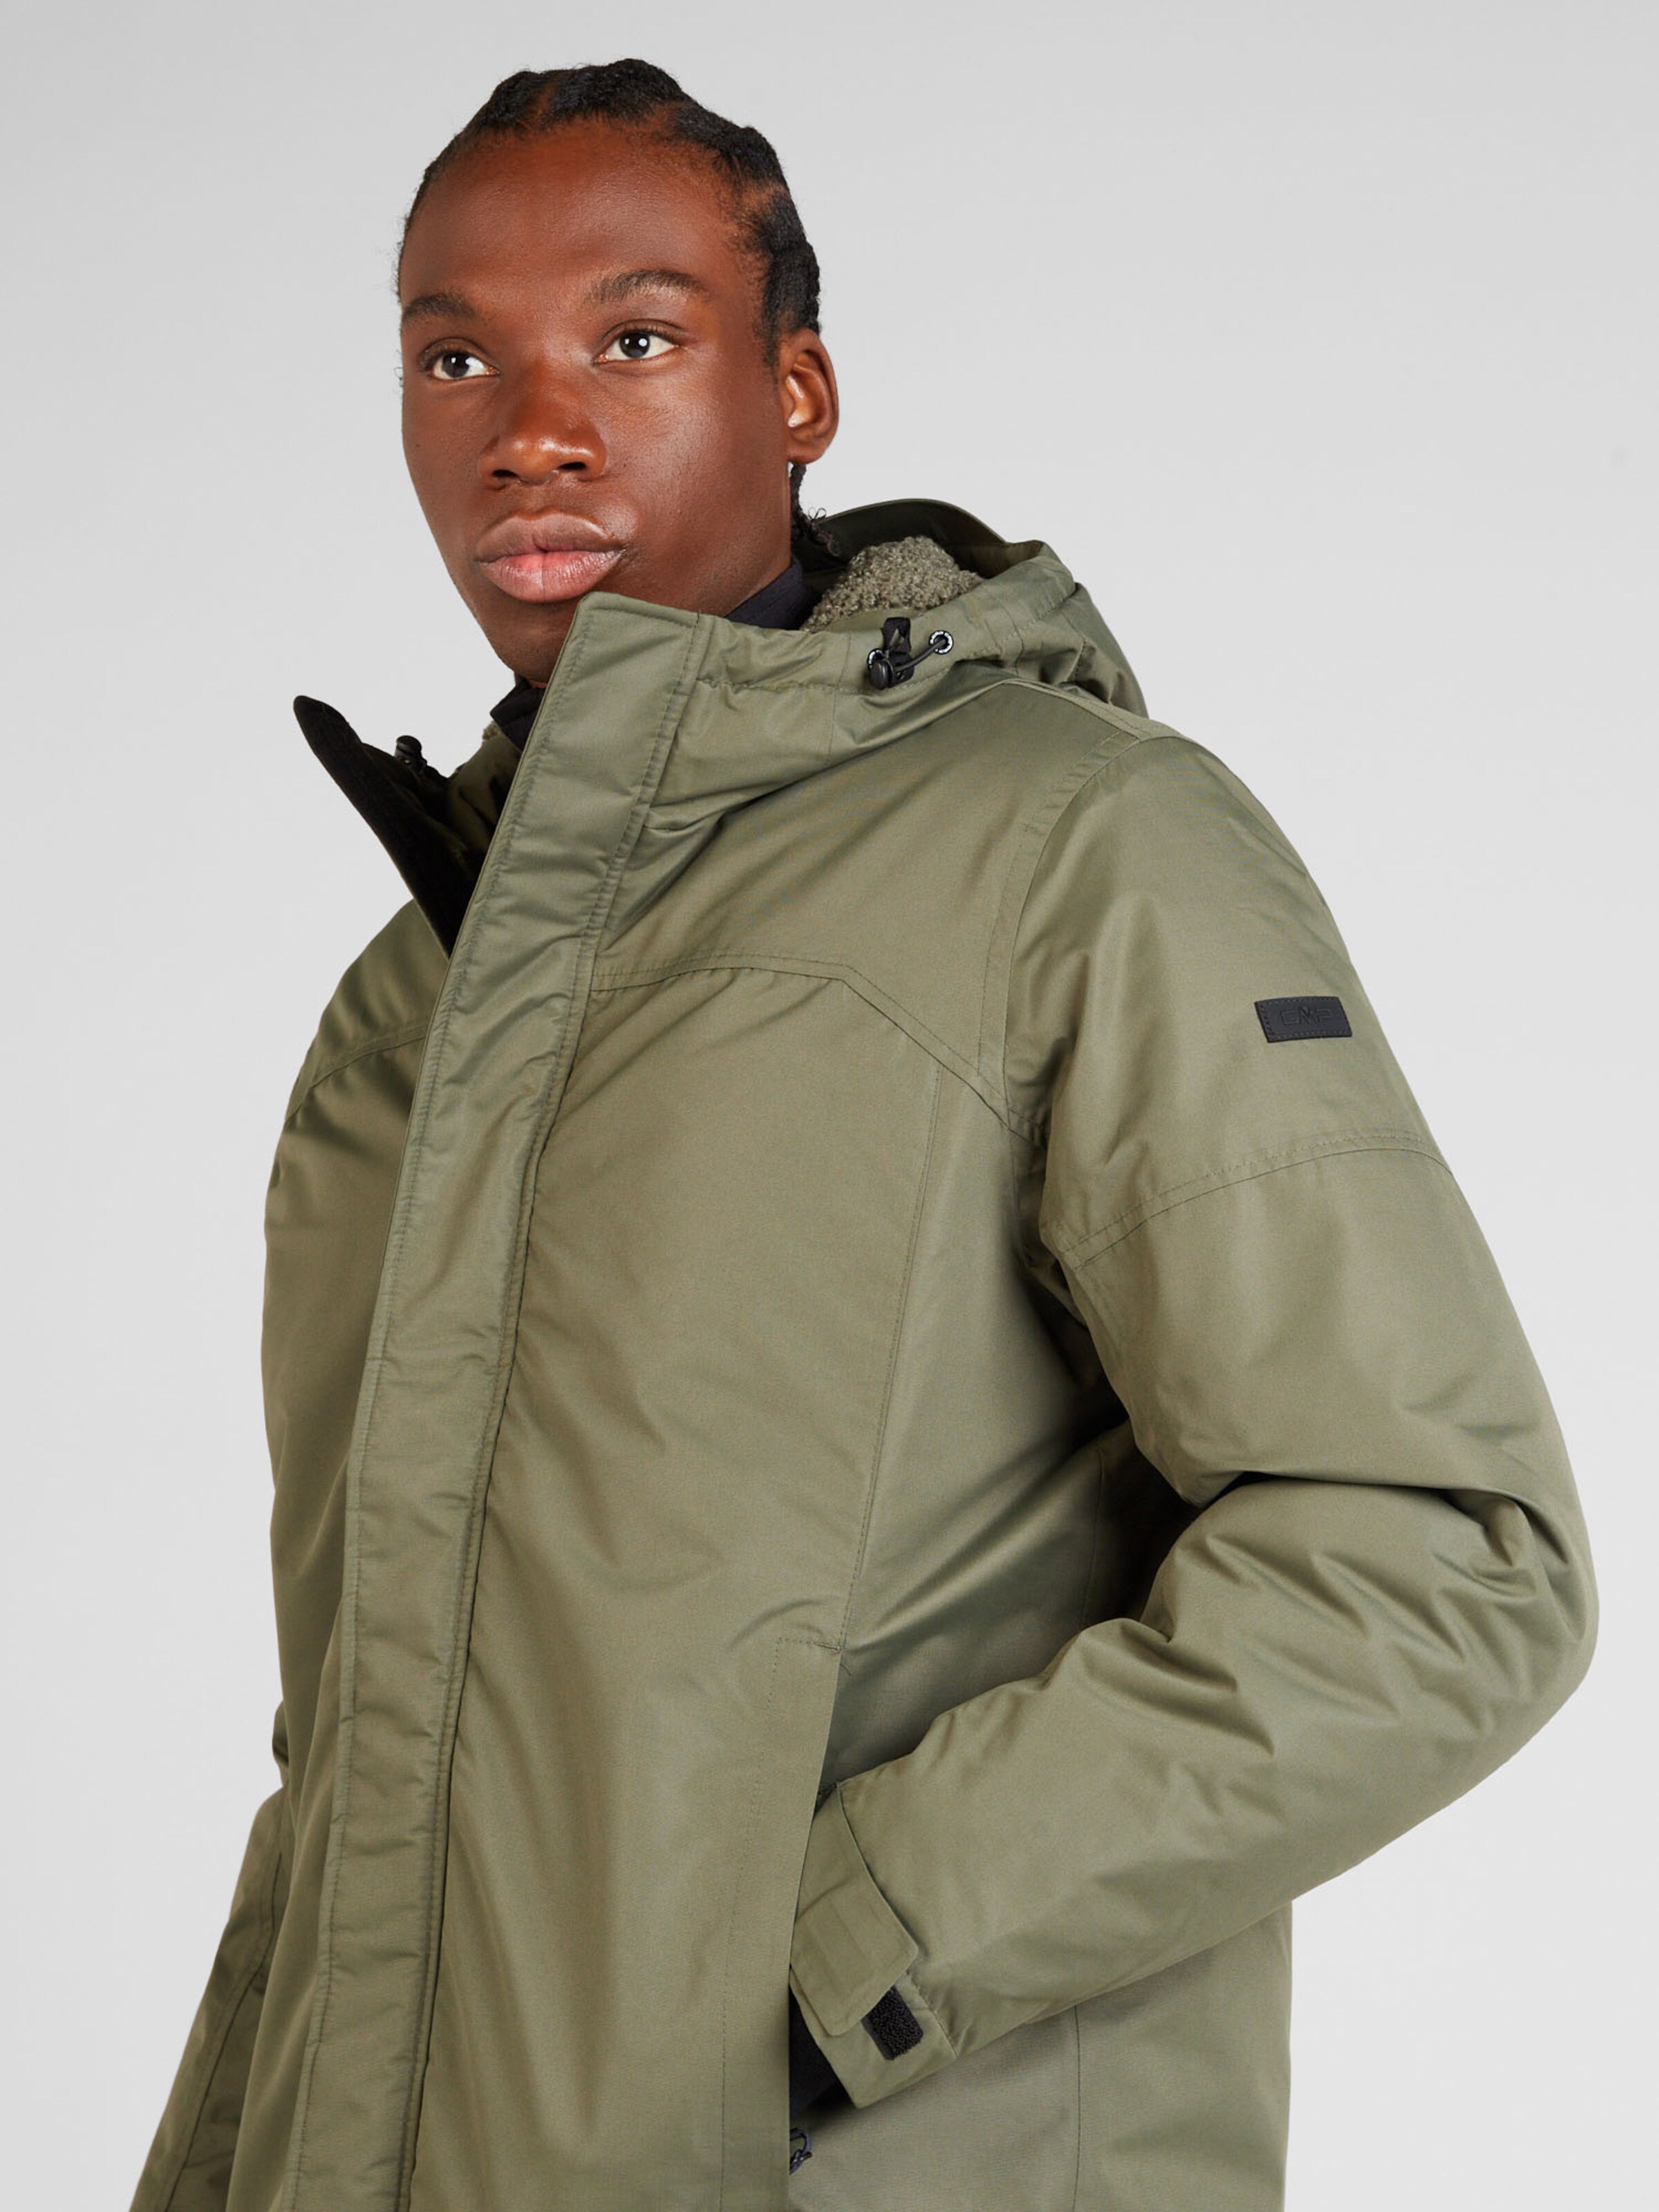 in ABOUT Khaki Outdoorjacke | CMP YOU